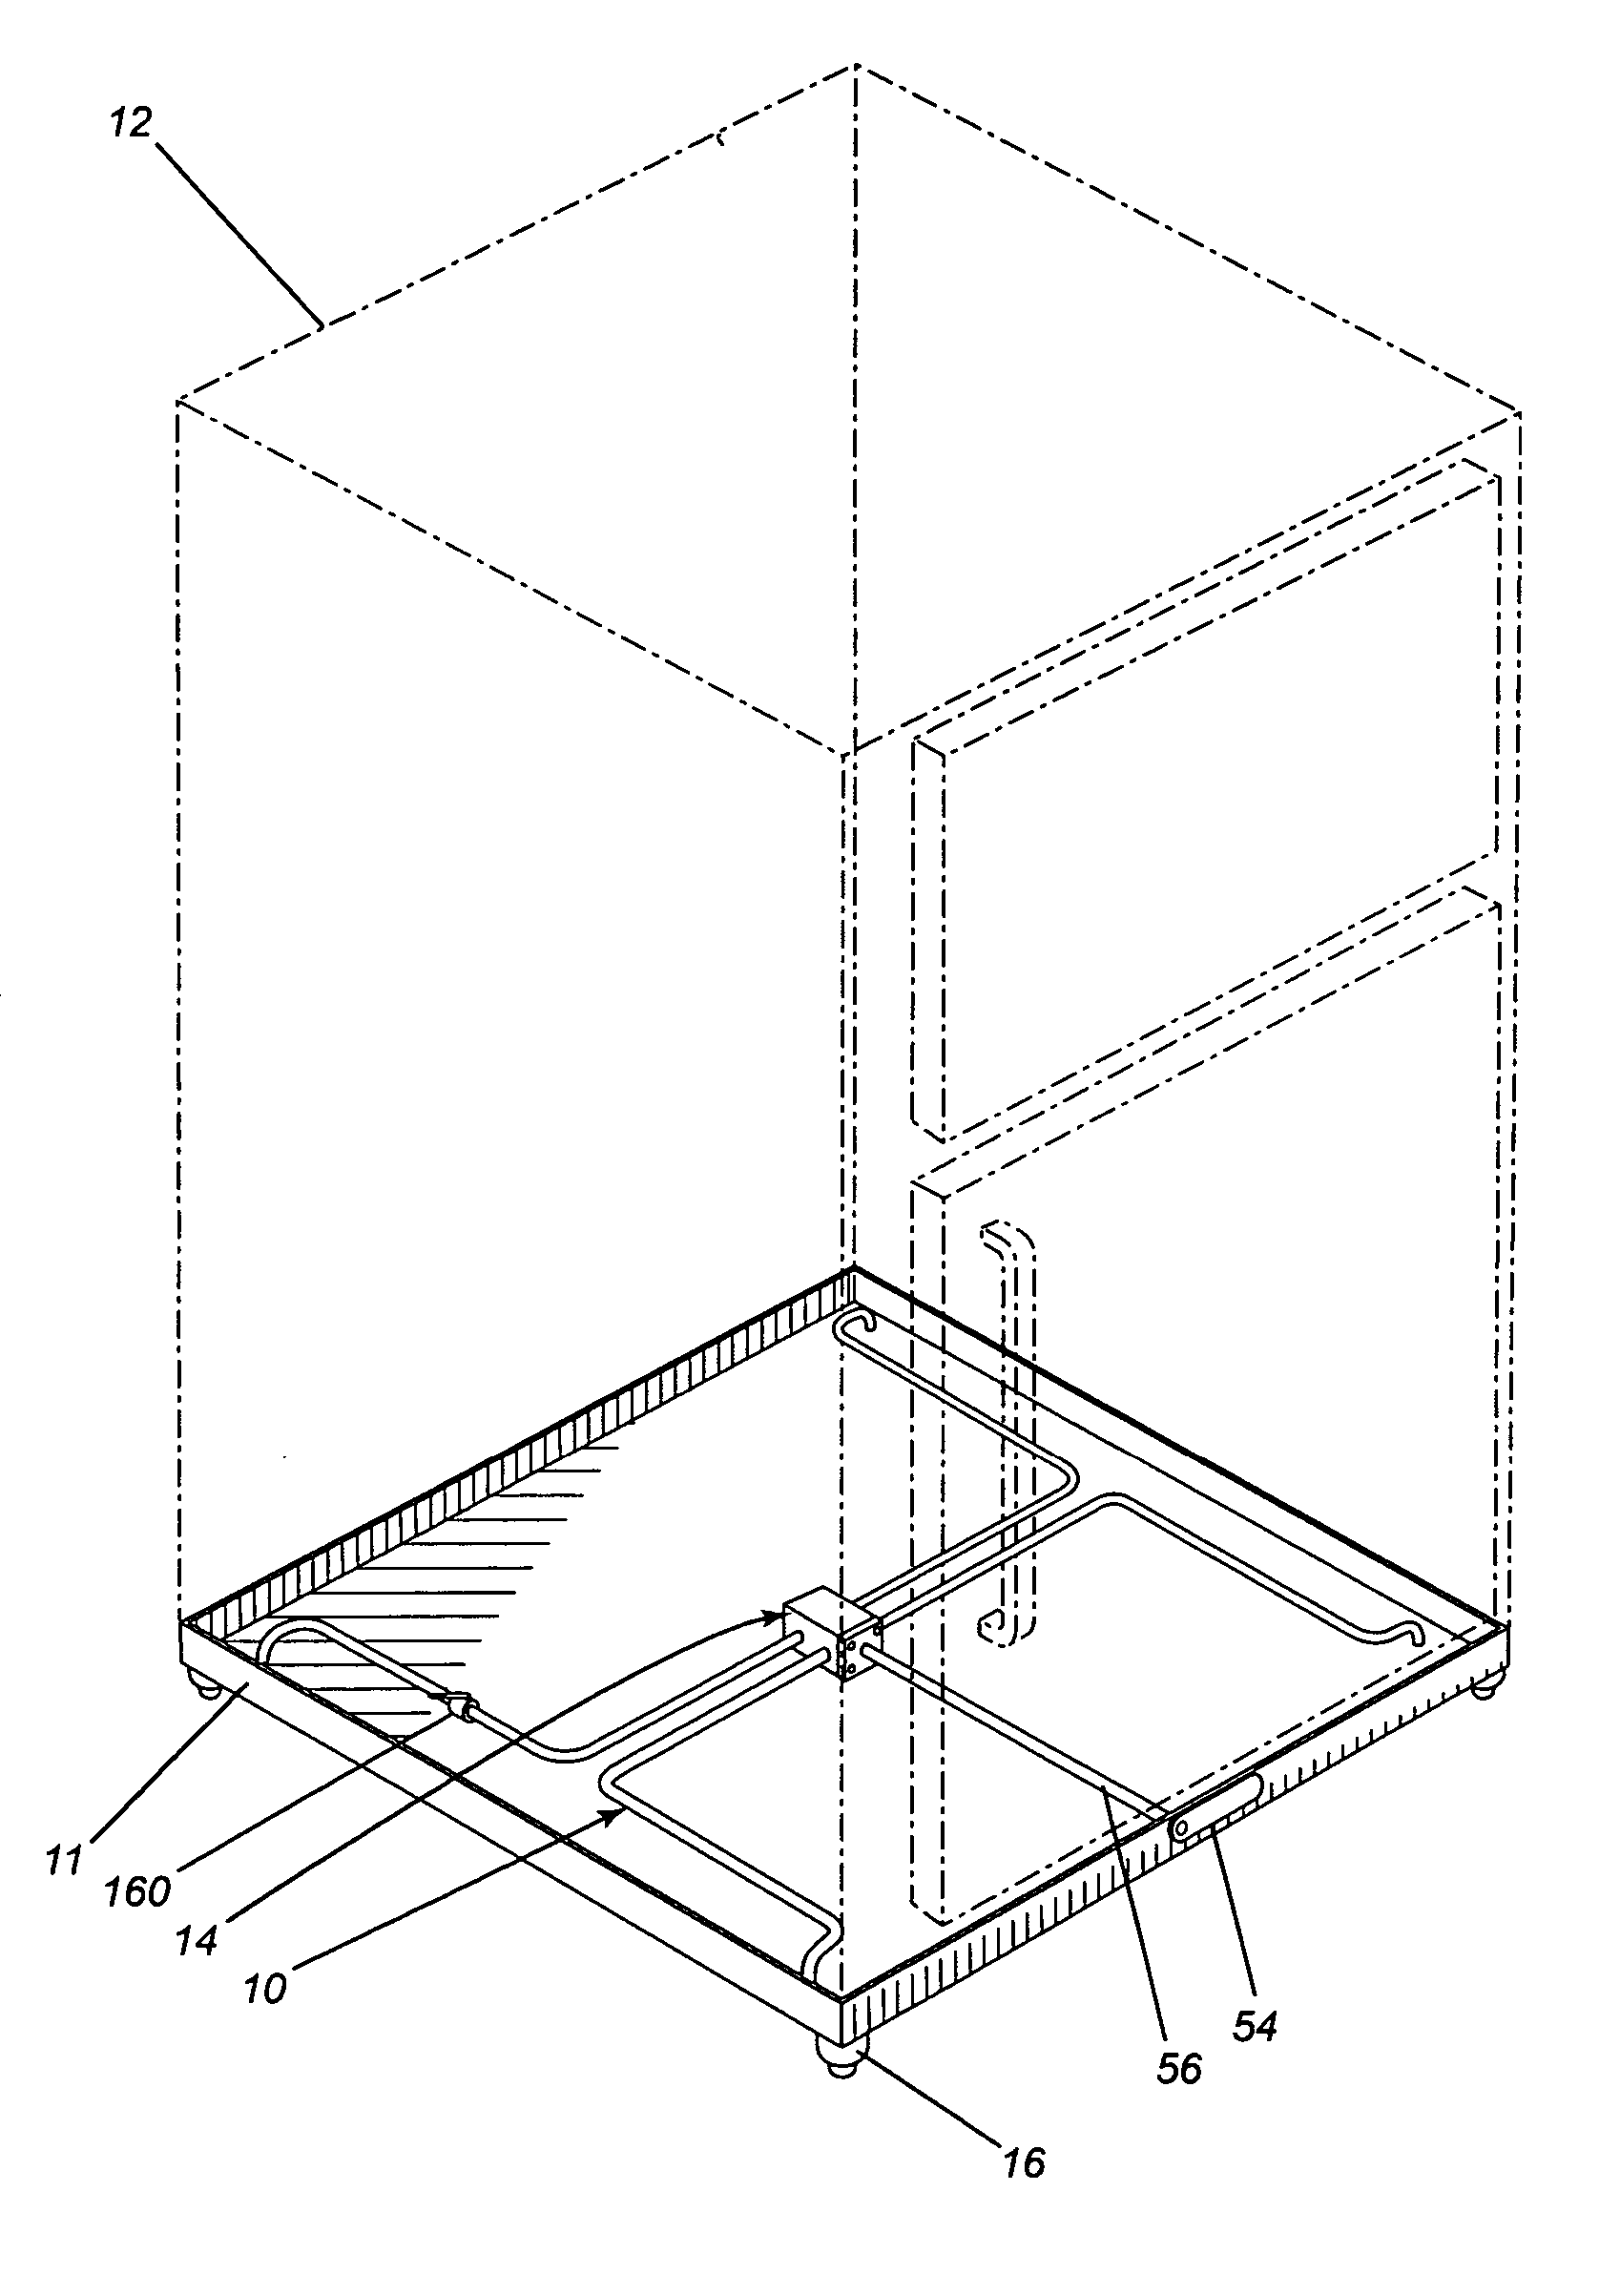 Device for adjusting the attitude of an object